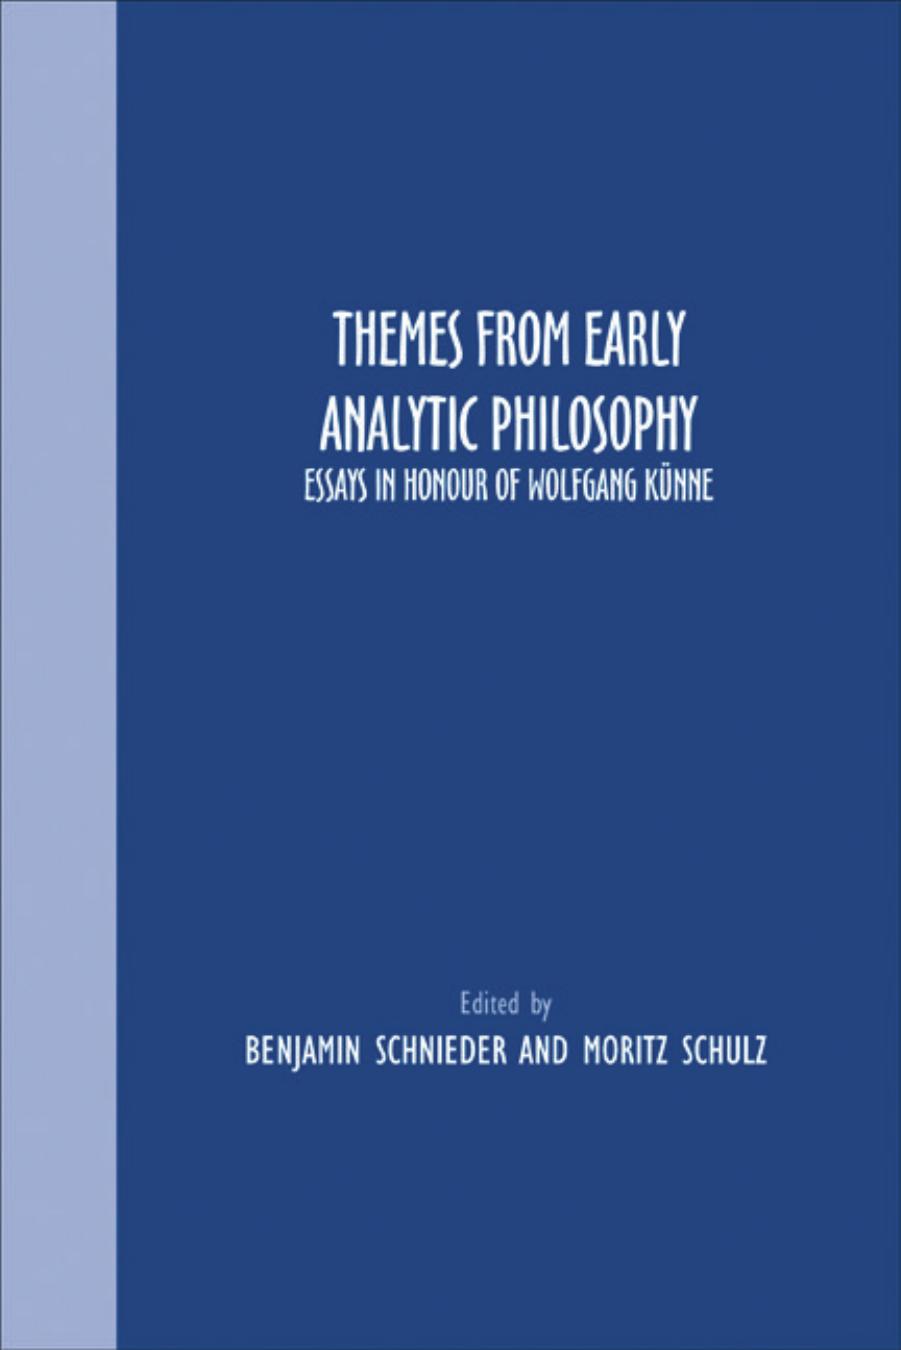 Themes From Early Analytic Philosophy: Essays in Honour of Wolfgang Künne